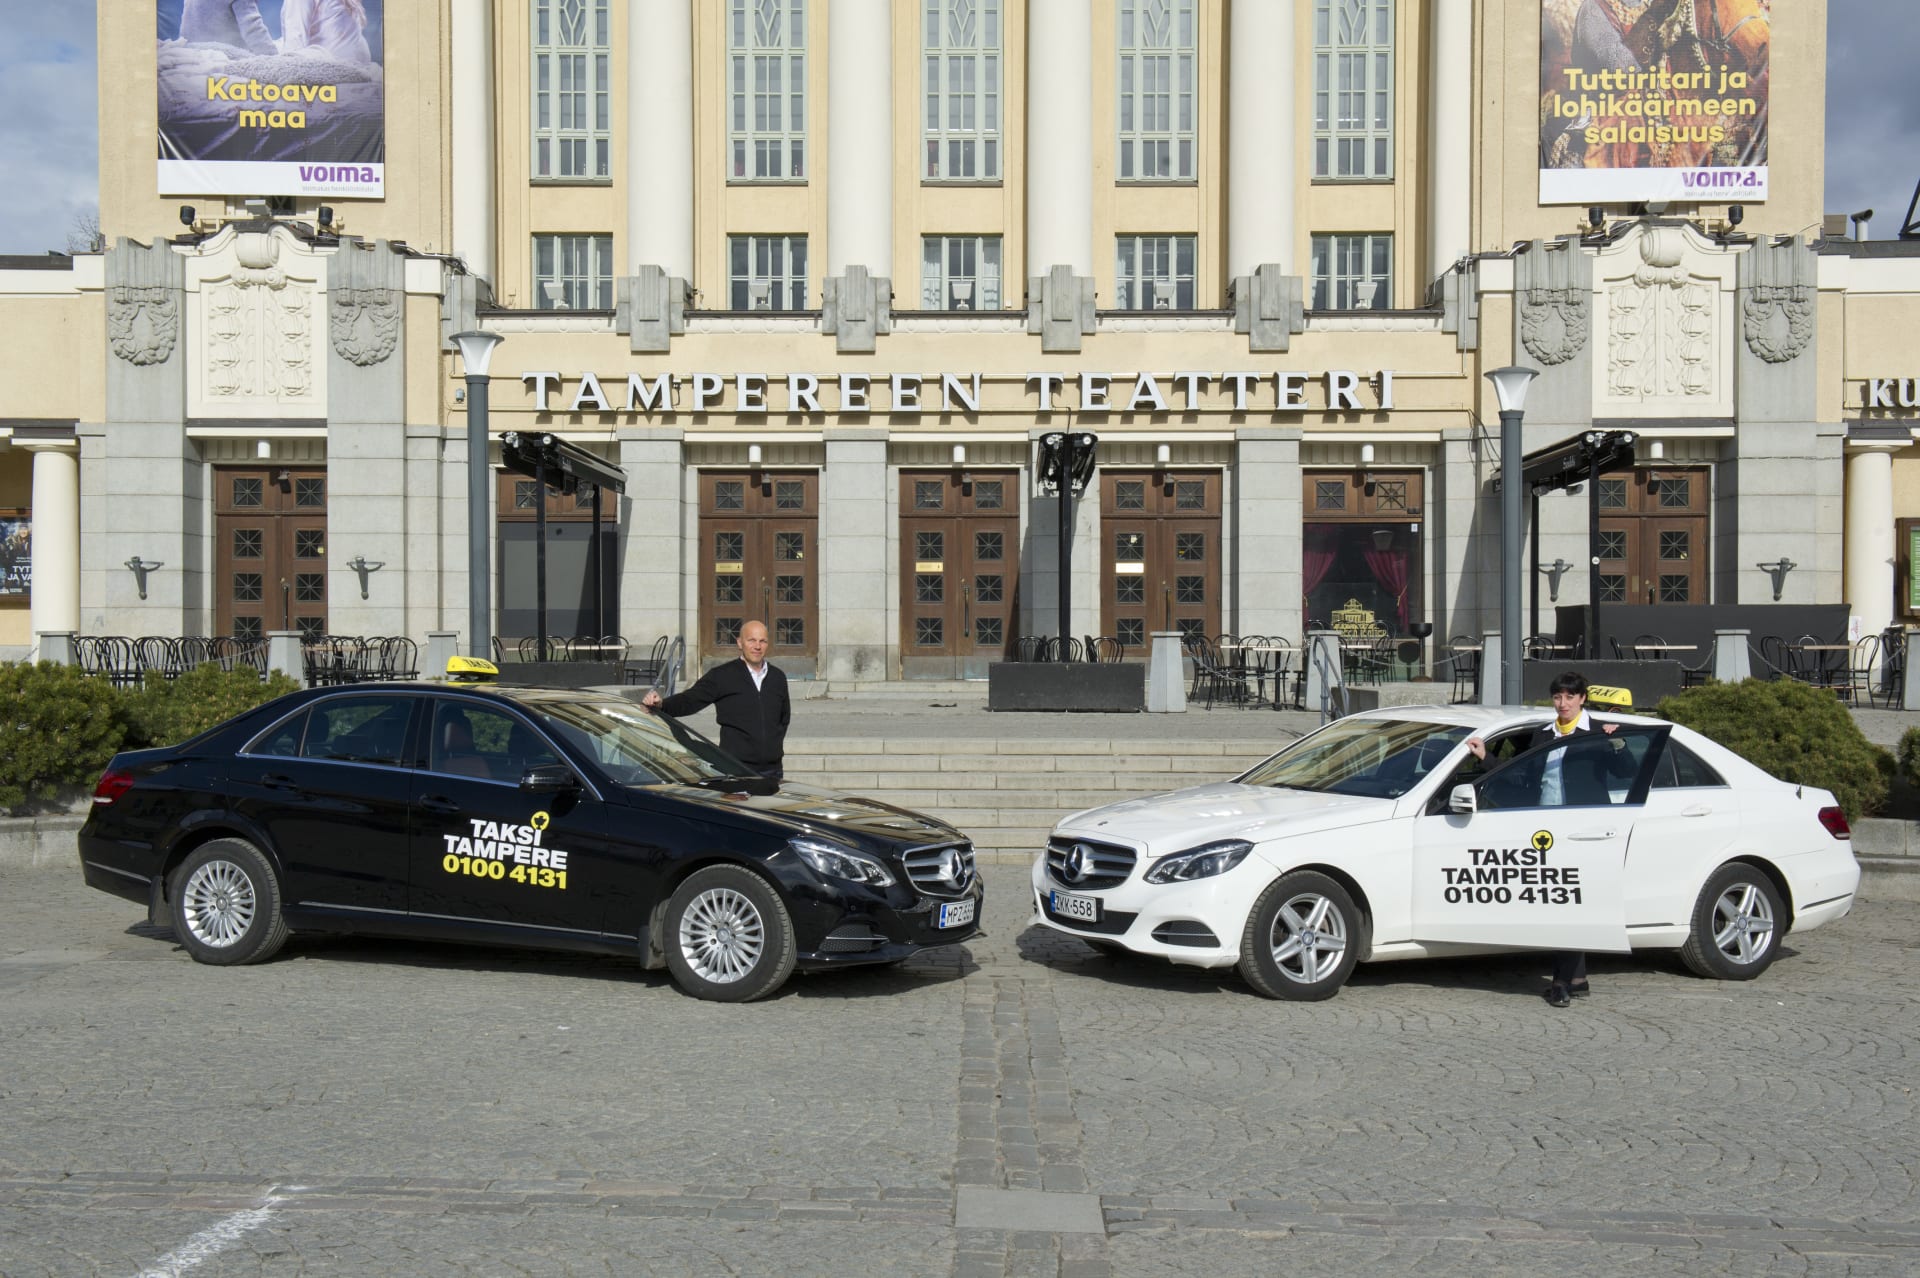 In front of Tampere Theatre, two taxis are parked, with a male driver and a female driver standing happily next to them.